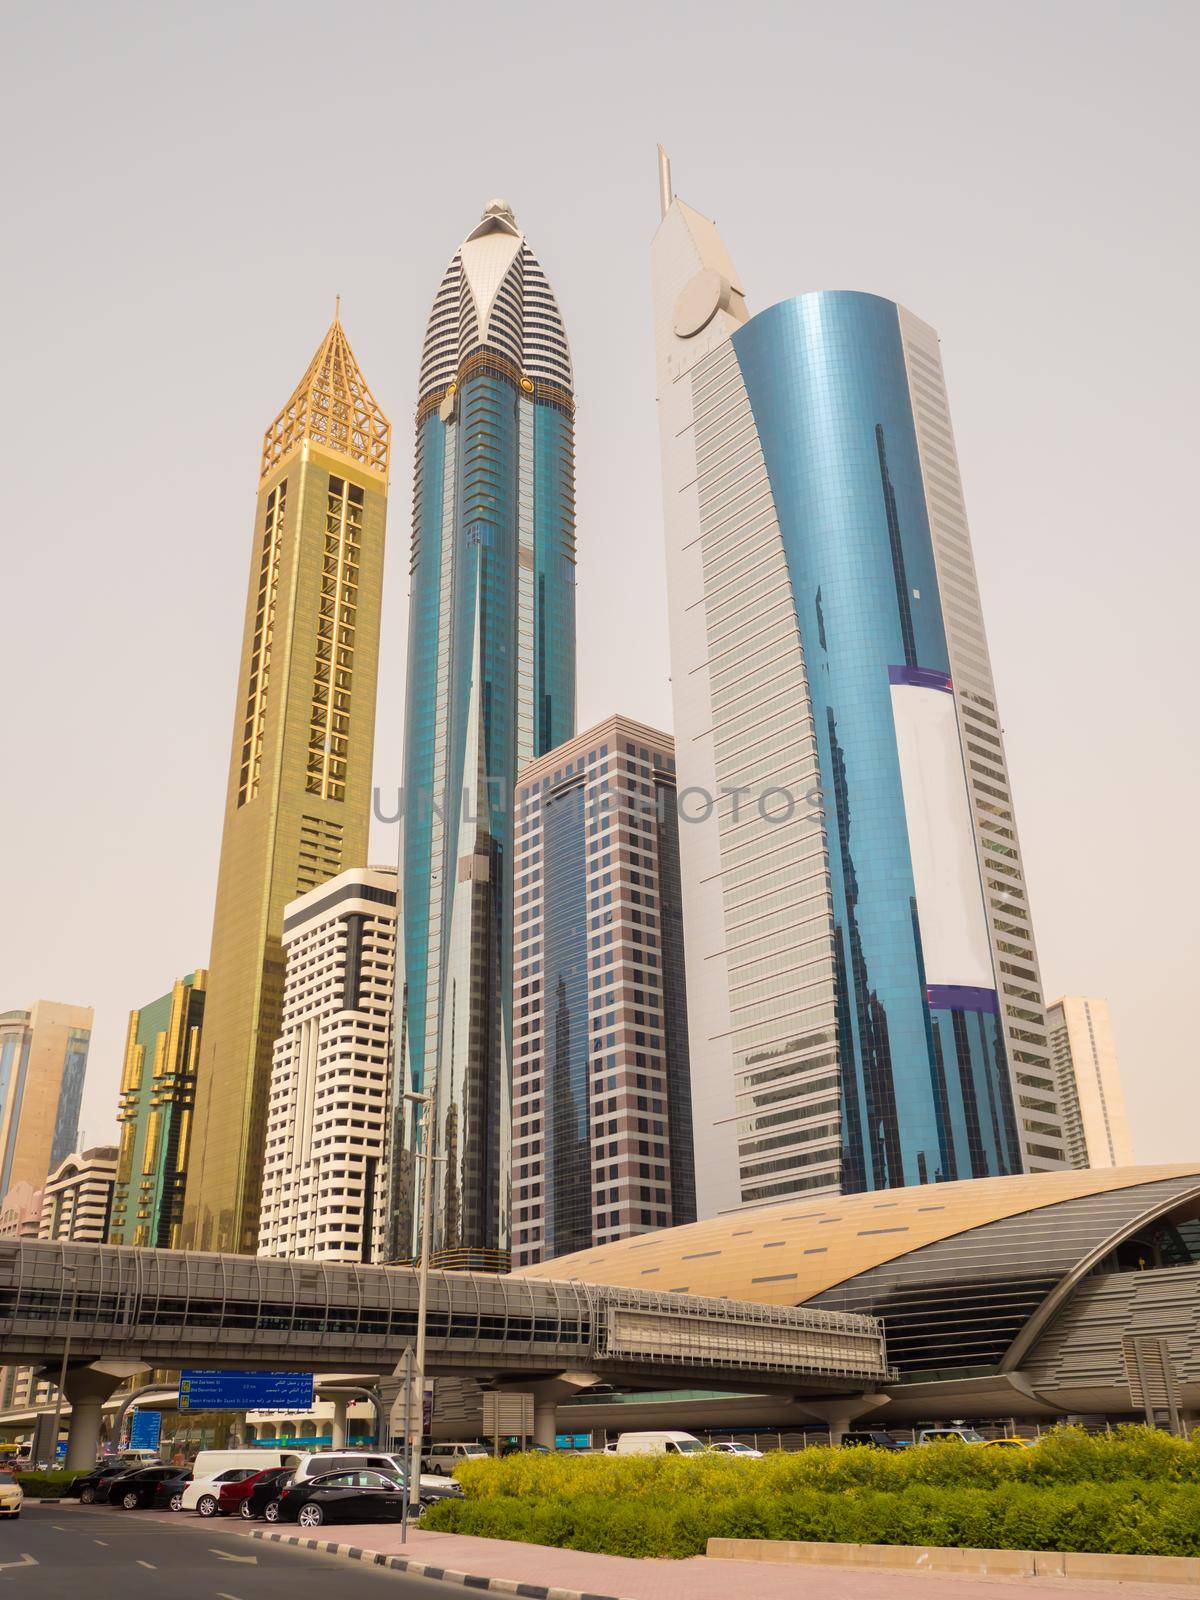 Skyscrapers on Sheikh Zayed Road in Dubai. by DovidPro